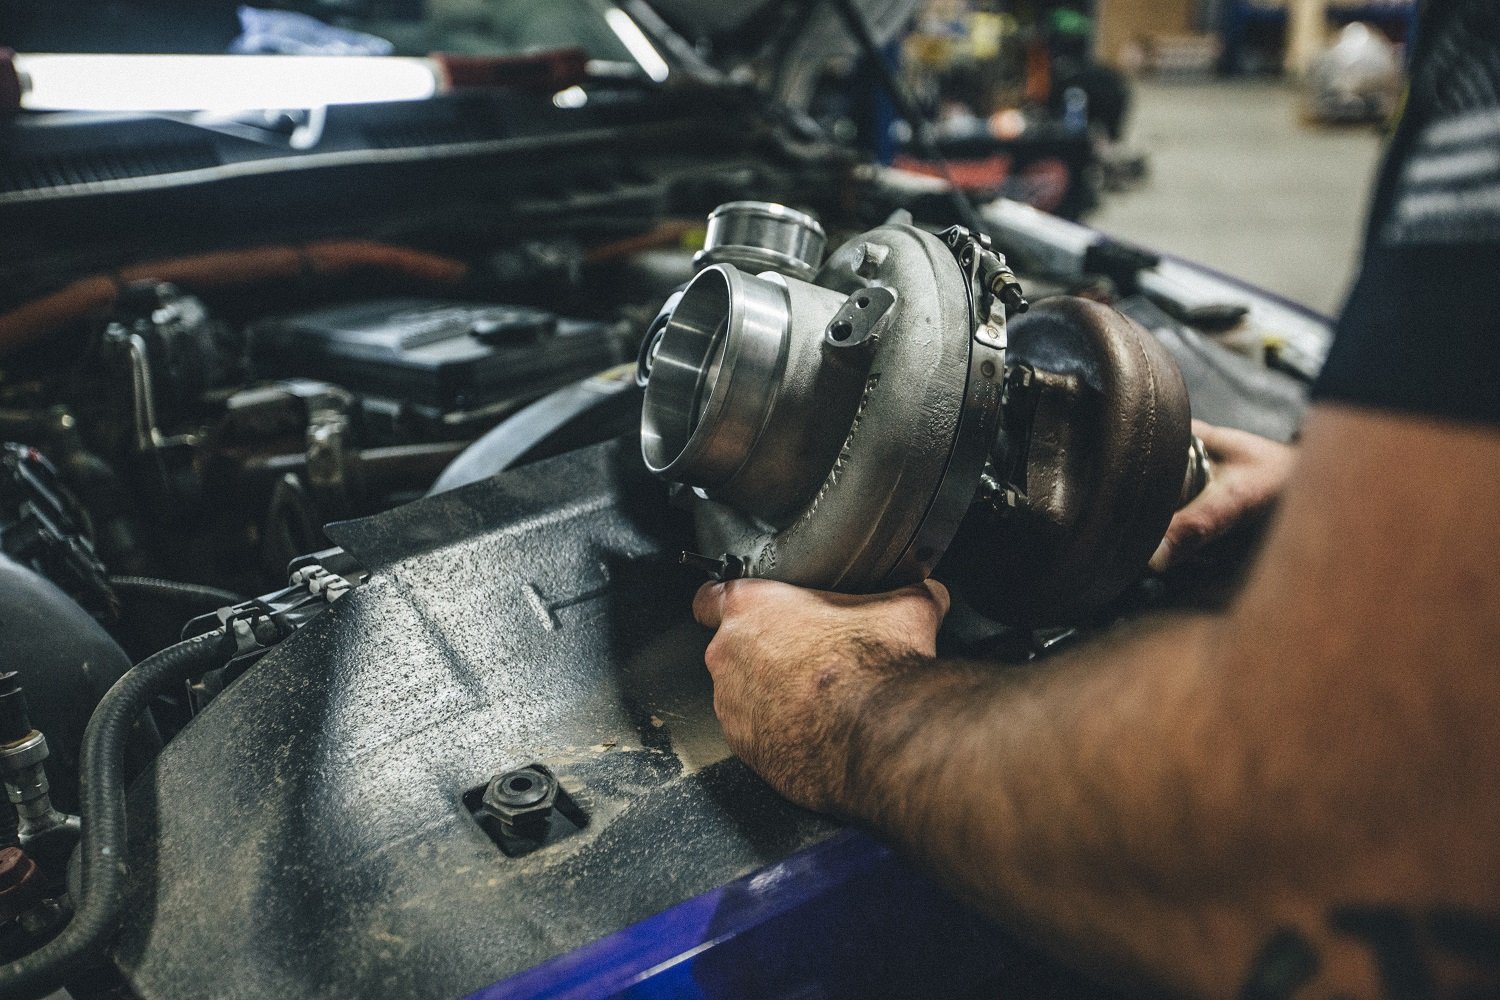 Turbo Replacement » Cost · Blown · Failure · Symptoms